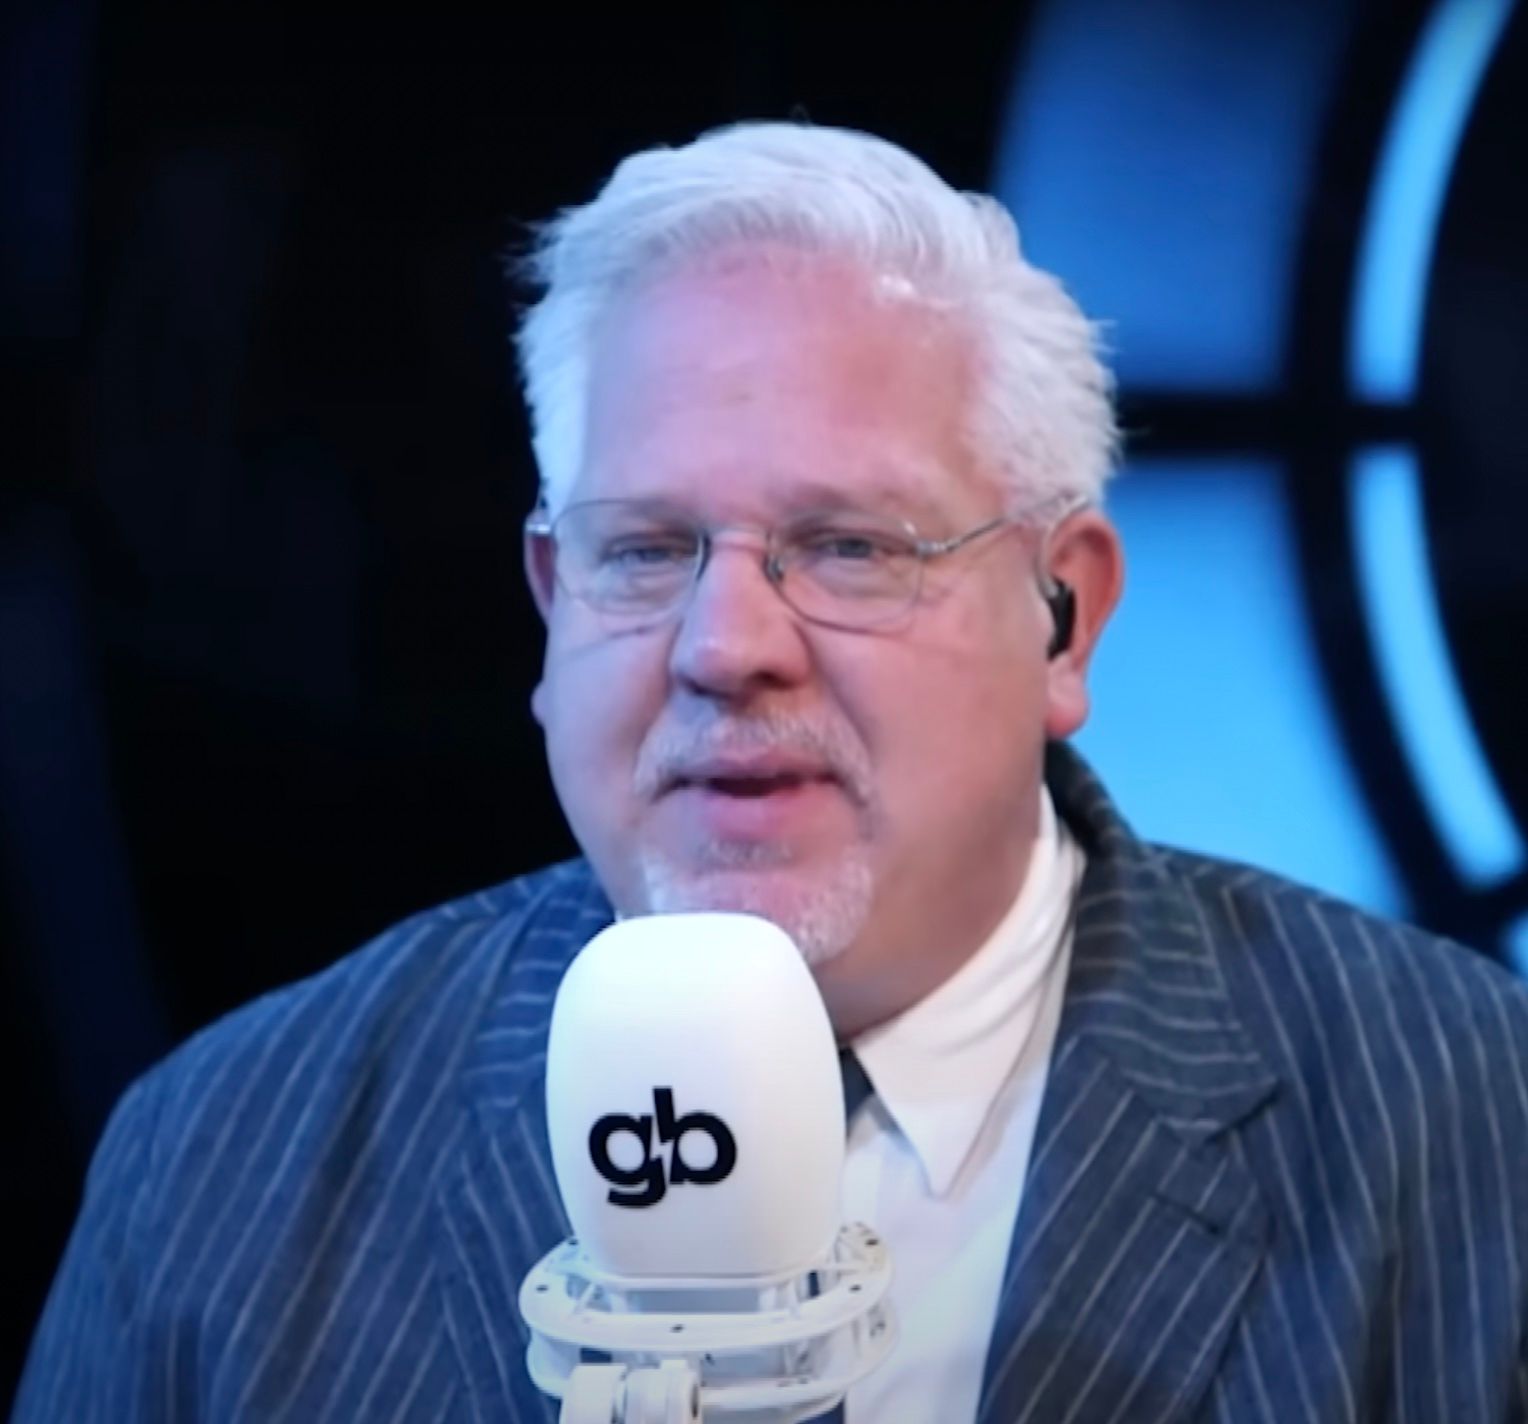 Blaze Media Co-Founder Glenn Beck Discusses New Film Plans, How To Bring True Change To Our Culture